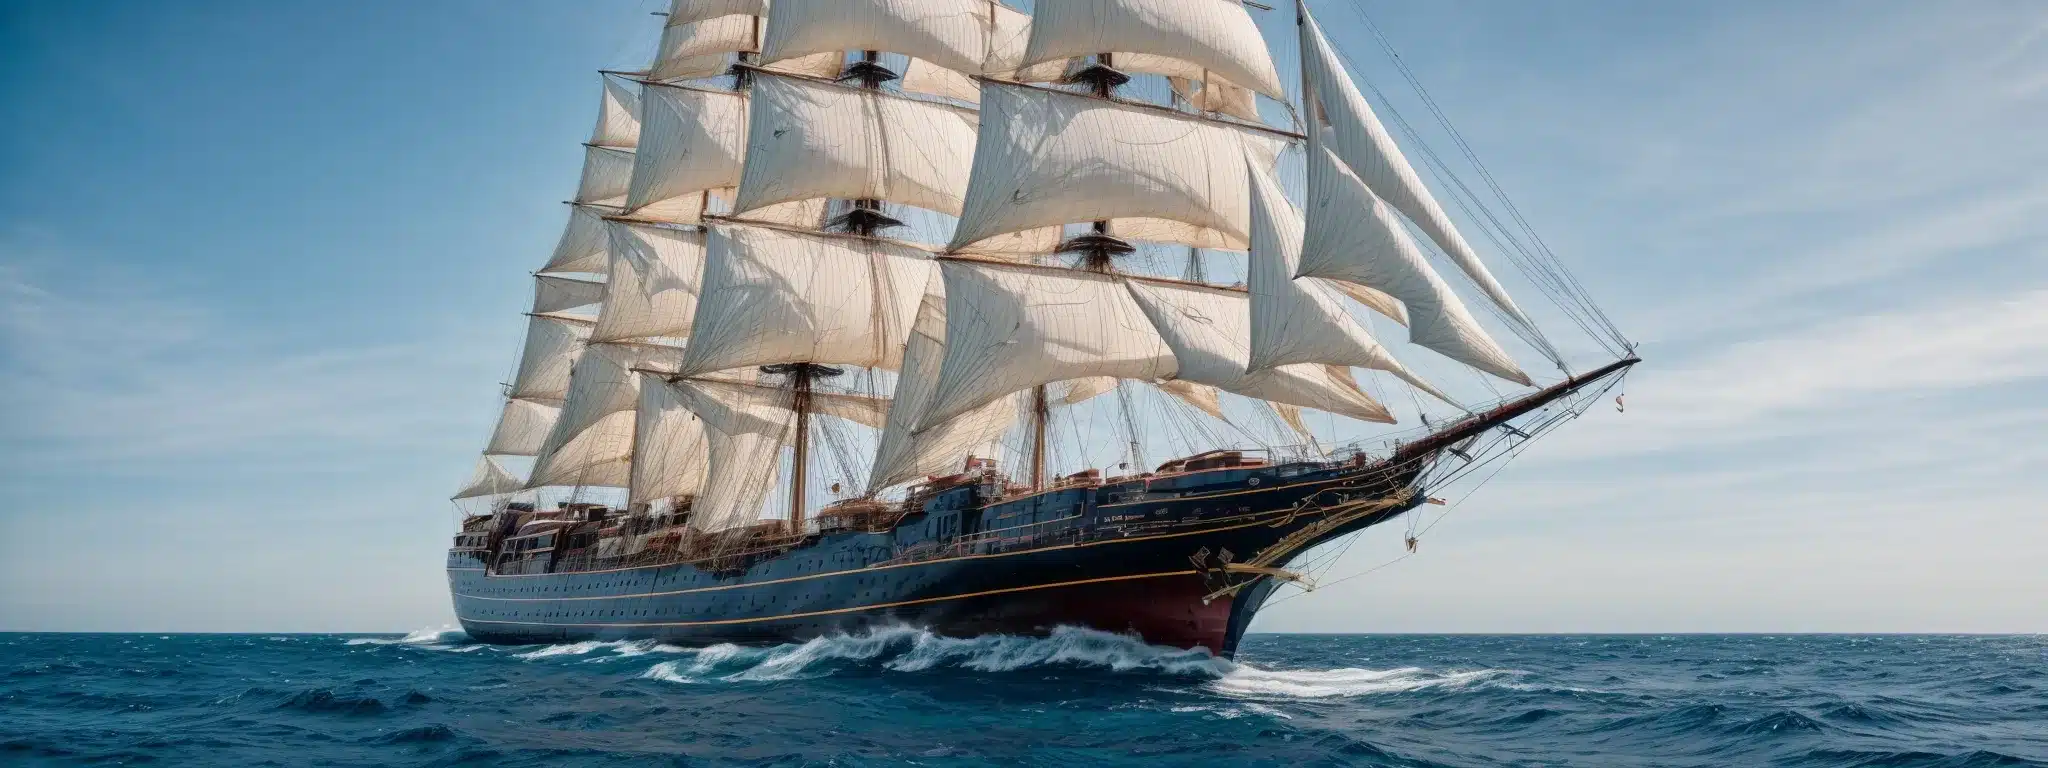 A Majestic Ship With Full Sails Navigating The Vibrant Blue Ocean Under A Clear Sky.